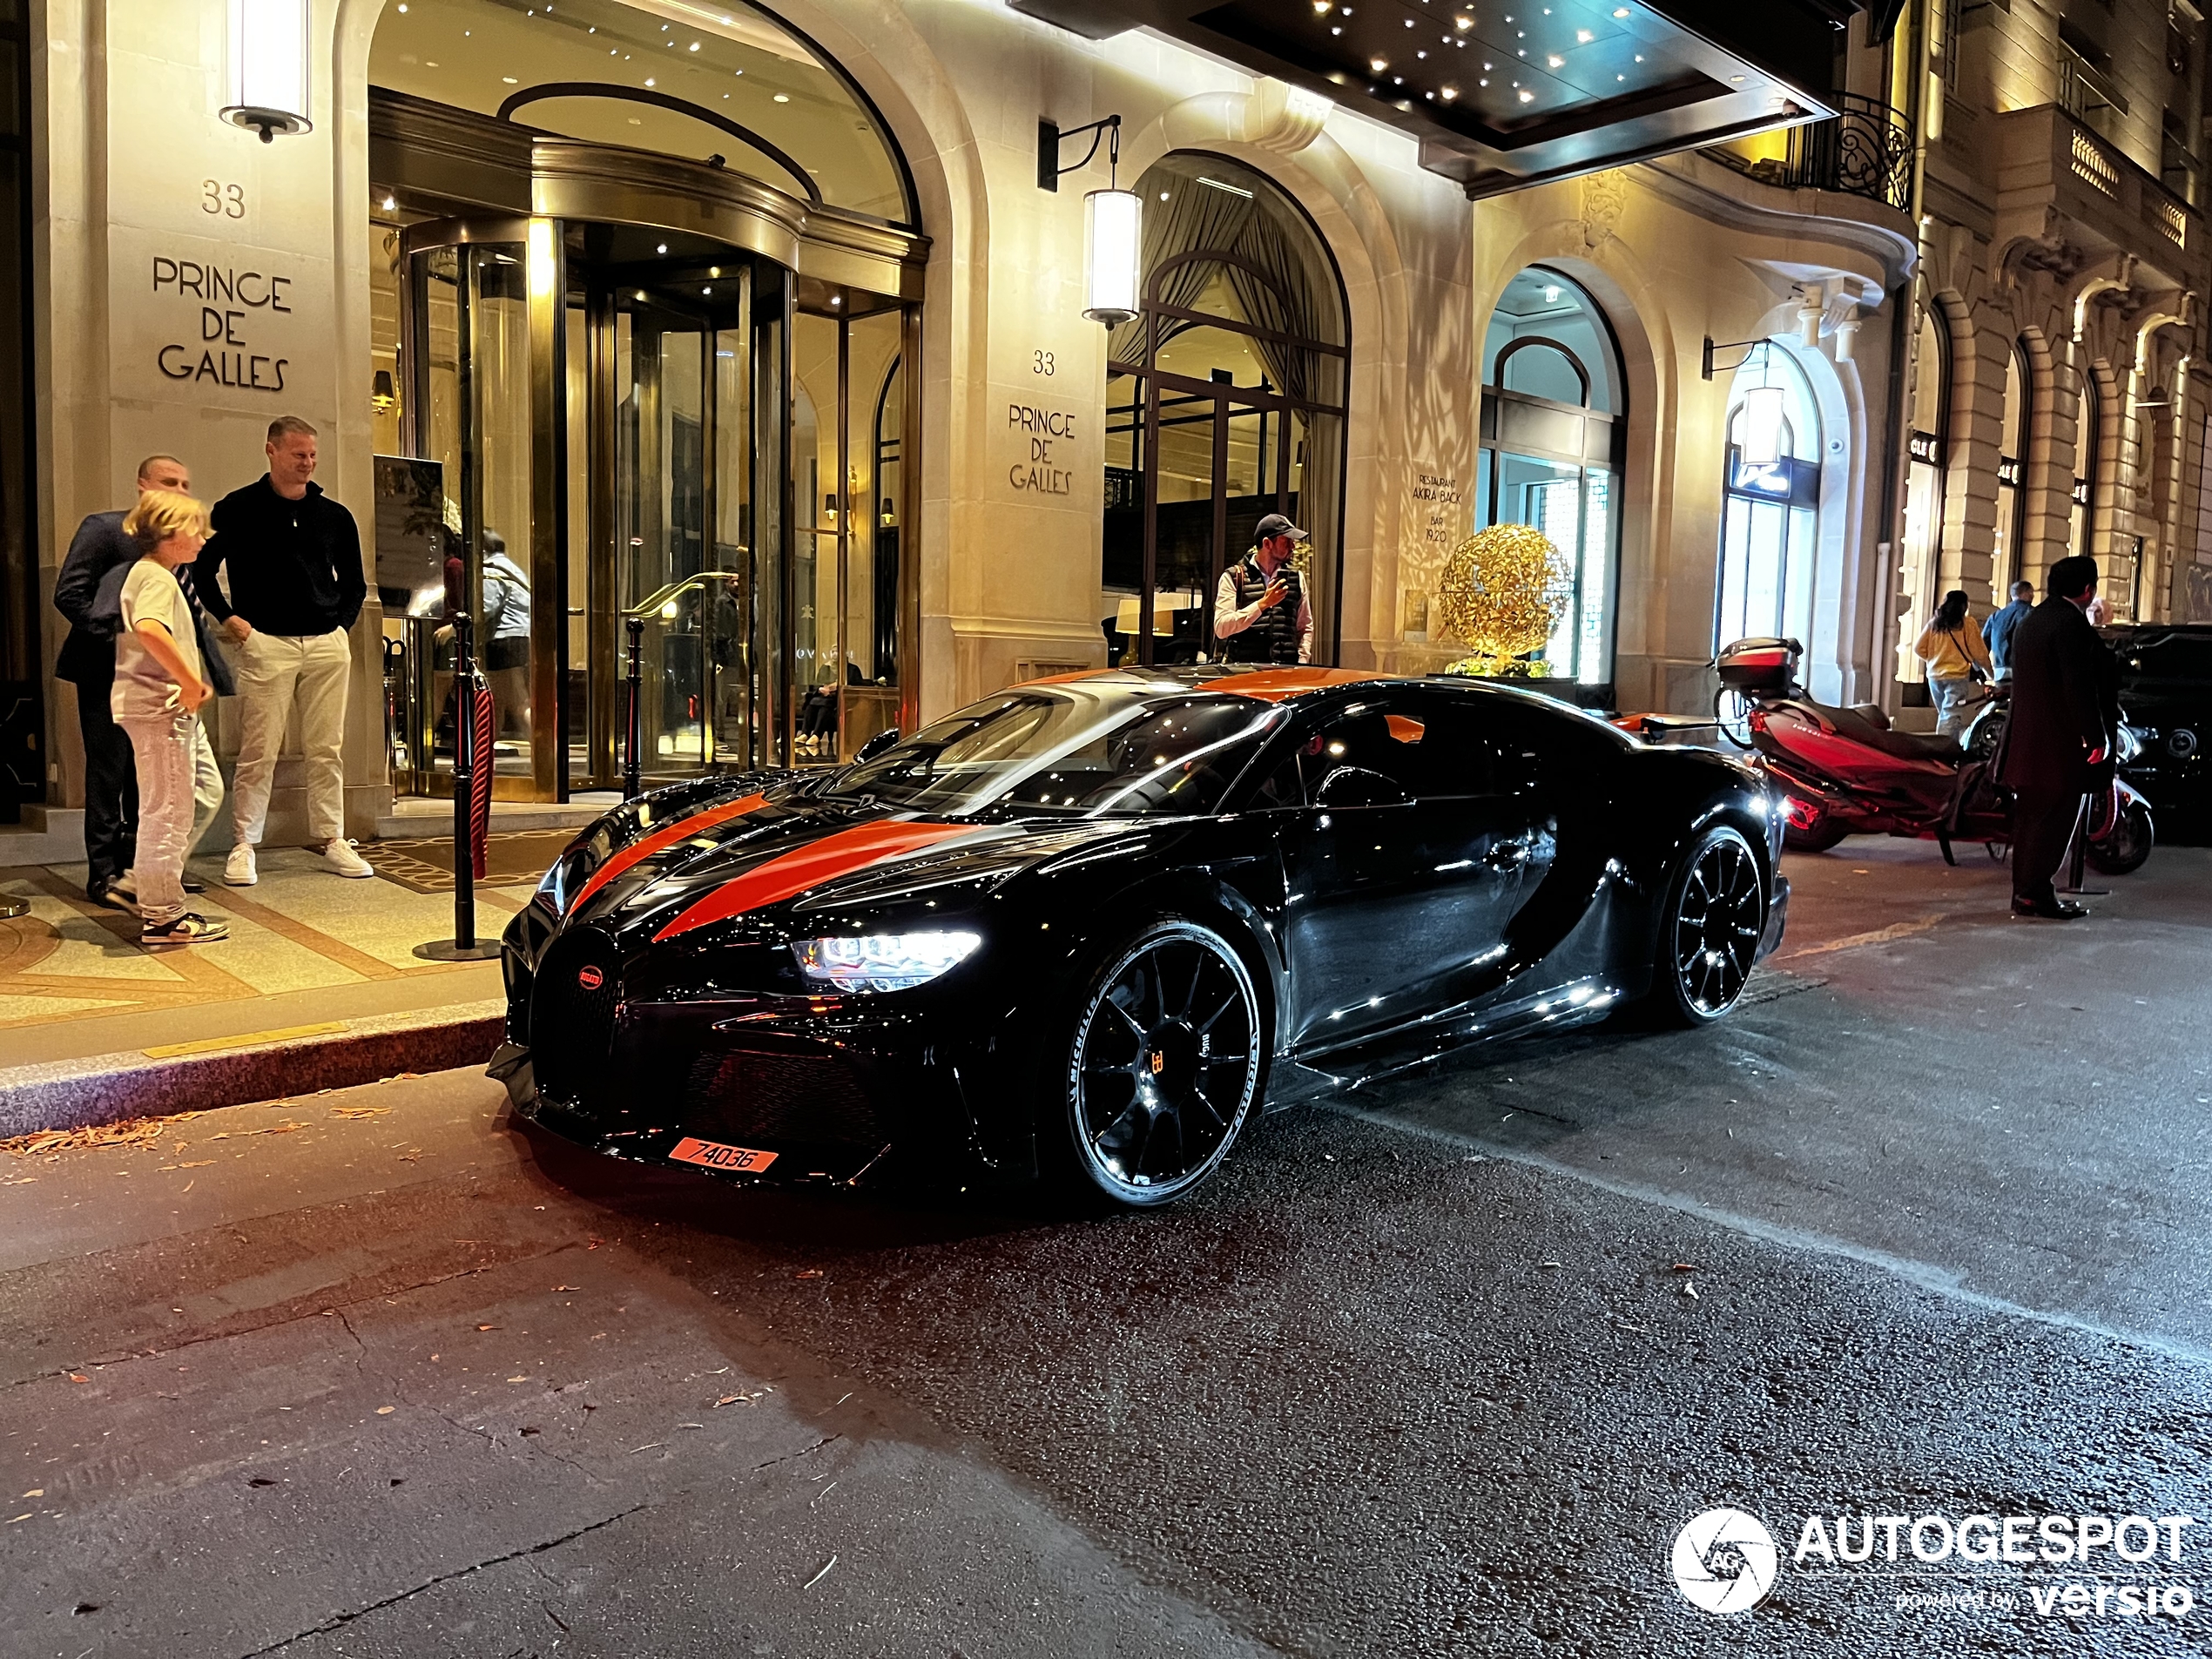 A new Chiron Super Sport 300+ shows up in Paris